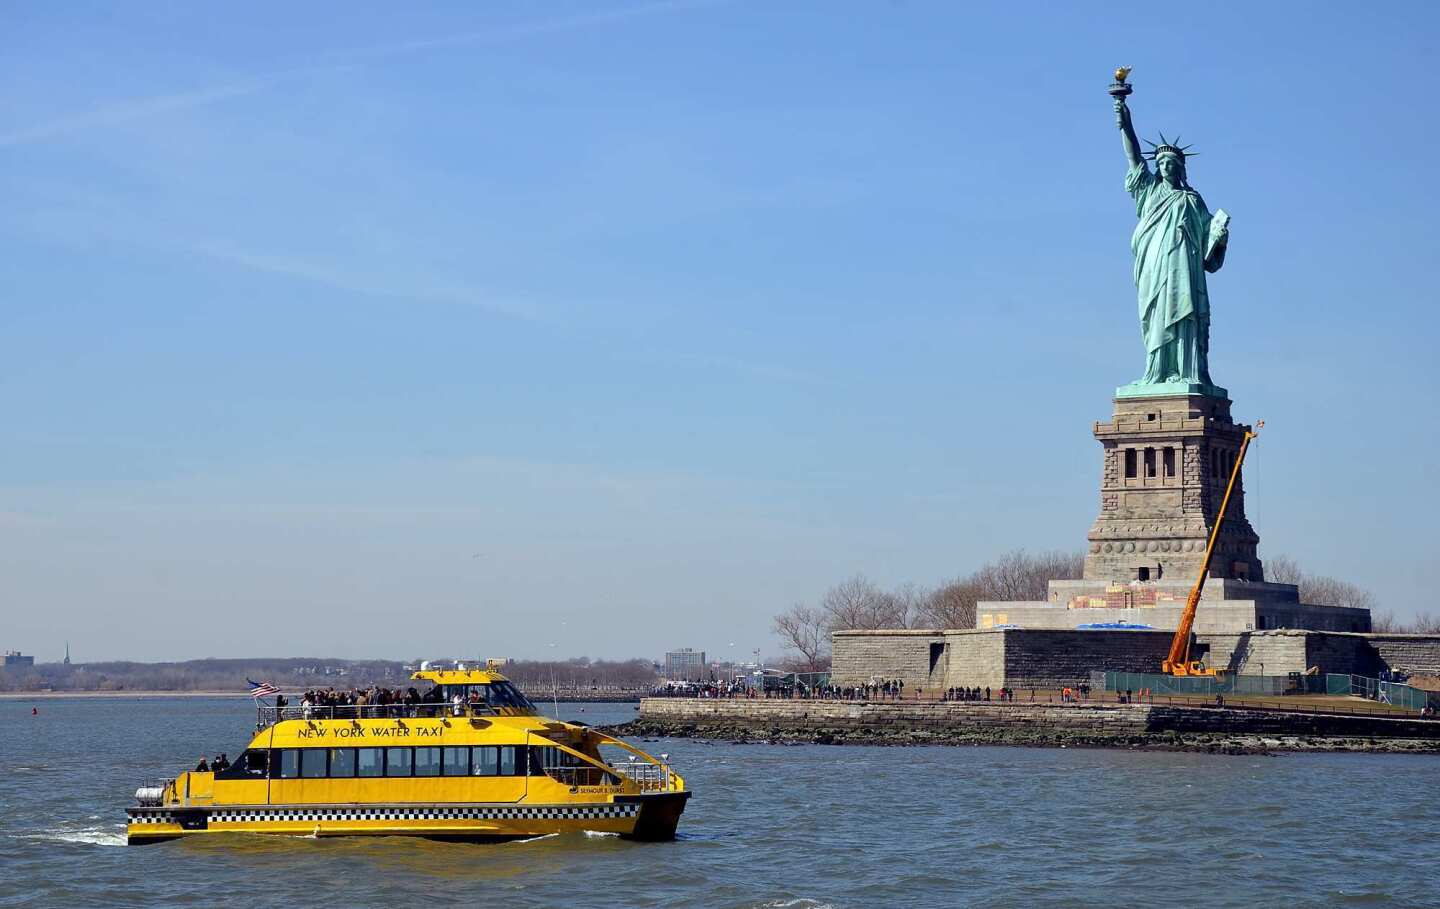 New York Water Taxi vessels cruise between the South Street Seaport and Pier 83 at West 42nd Street, passing the Statue of Liberty on the way.